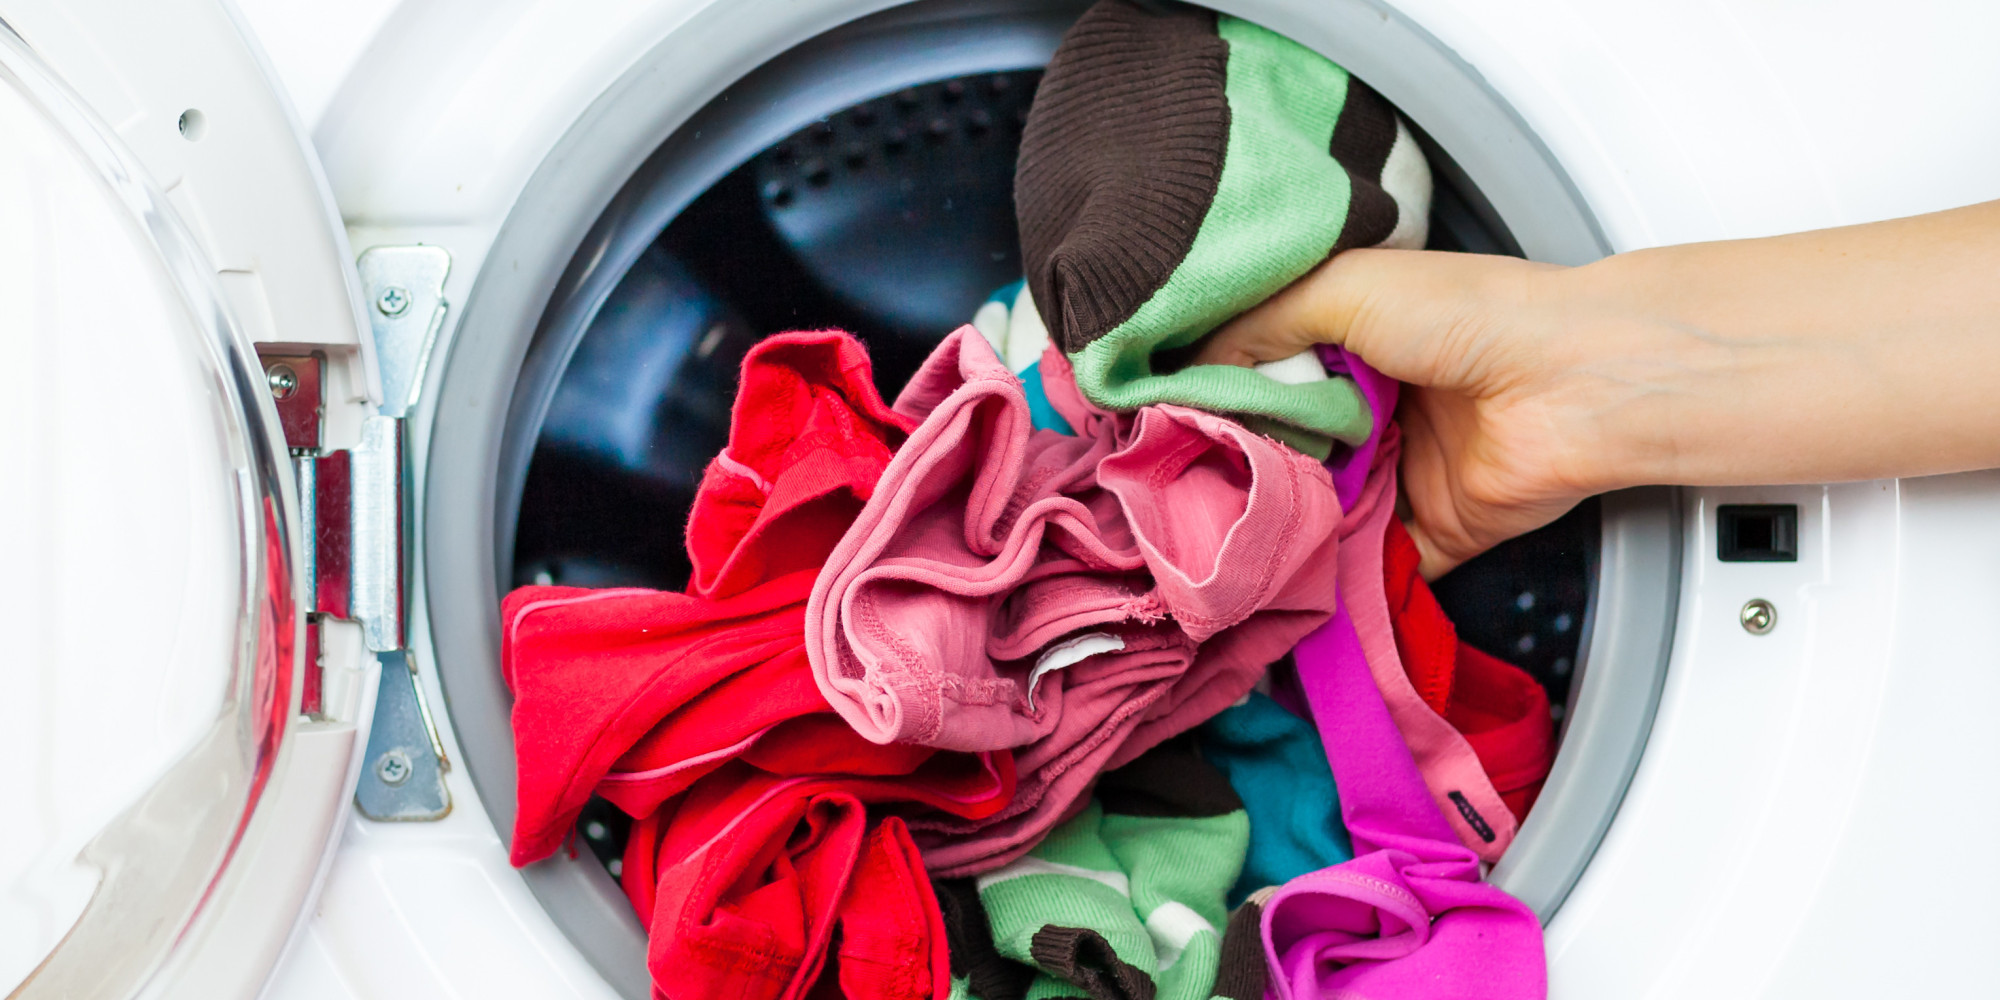 How Important Is It to Wash New Clothes Before Wearing Them?